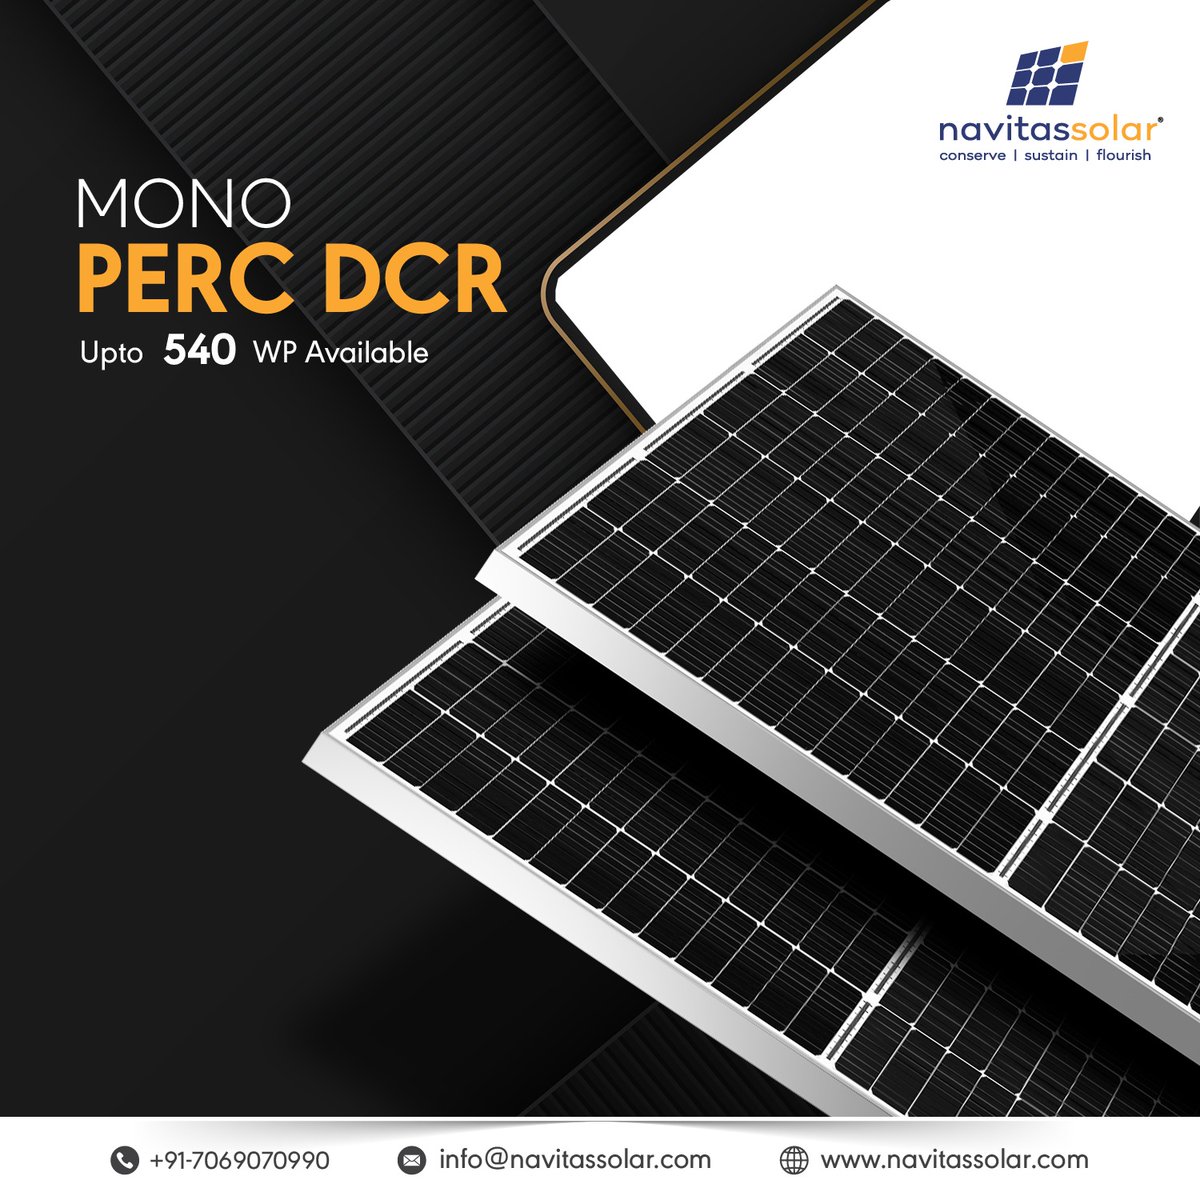 Introducing the #solar #innovation from Navitas Solar Company #MONO #PERC #DCR Panels 𝐮𝐩 𝐭𝐨 𝟓𝟒𝟎 𝐖𝐚𝐭𝐭𝐬. To know more Visit us at: navitassolar.com Write to us at: info@navitassolar.com Call us at +91 70690 70990 #NavitasSolar